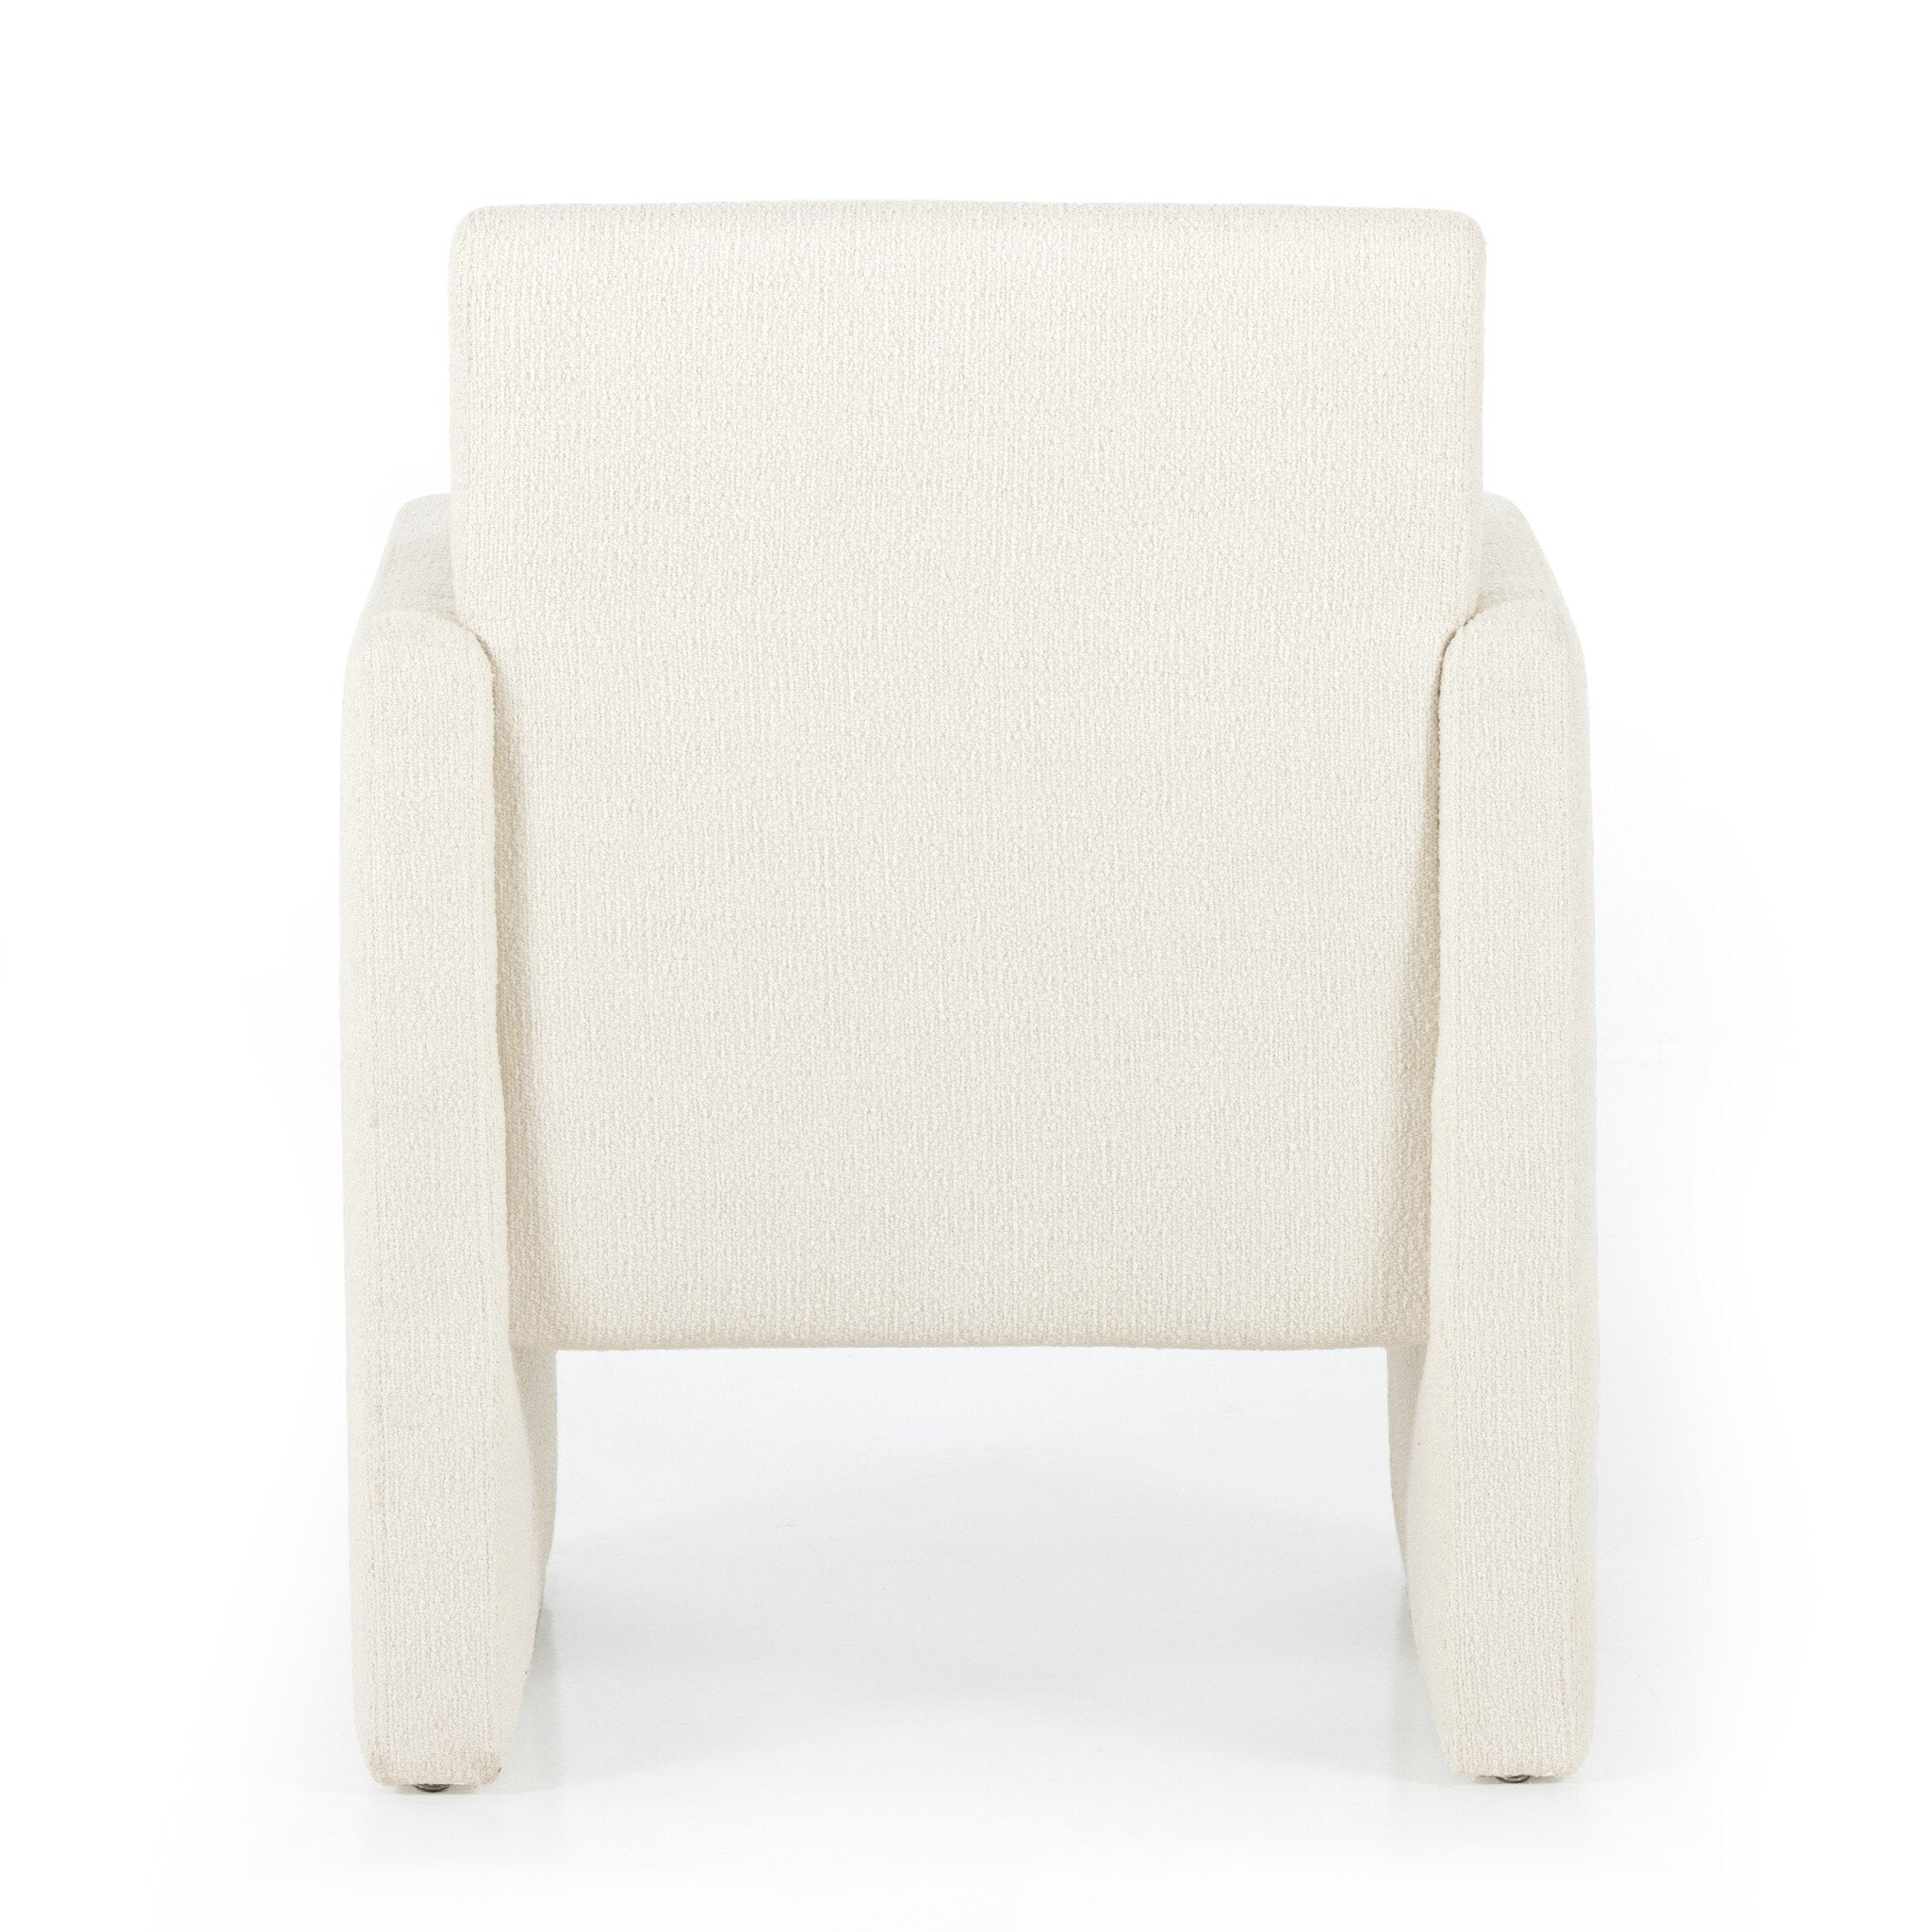 Kima Dining Chair - Fayette Cloud